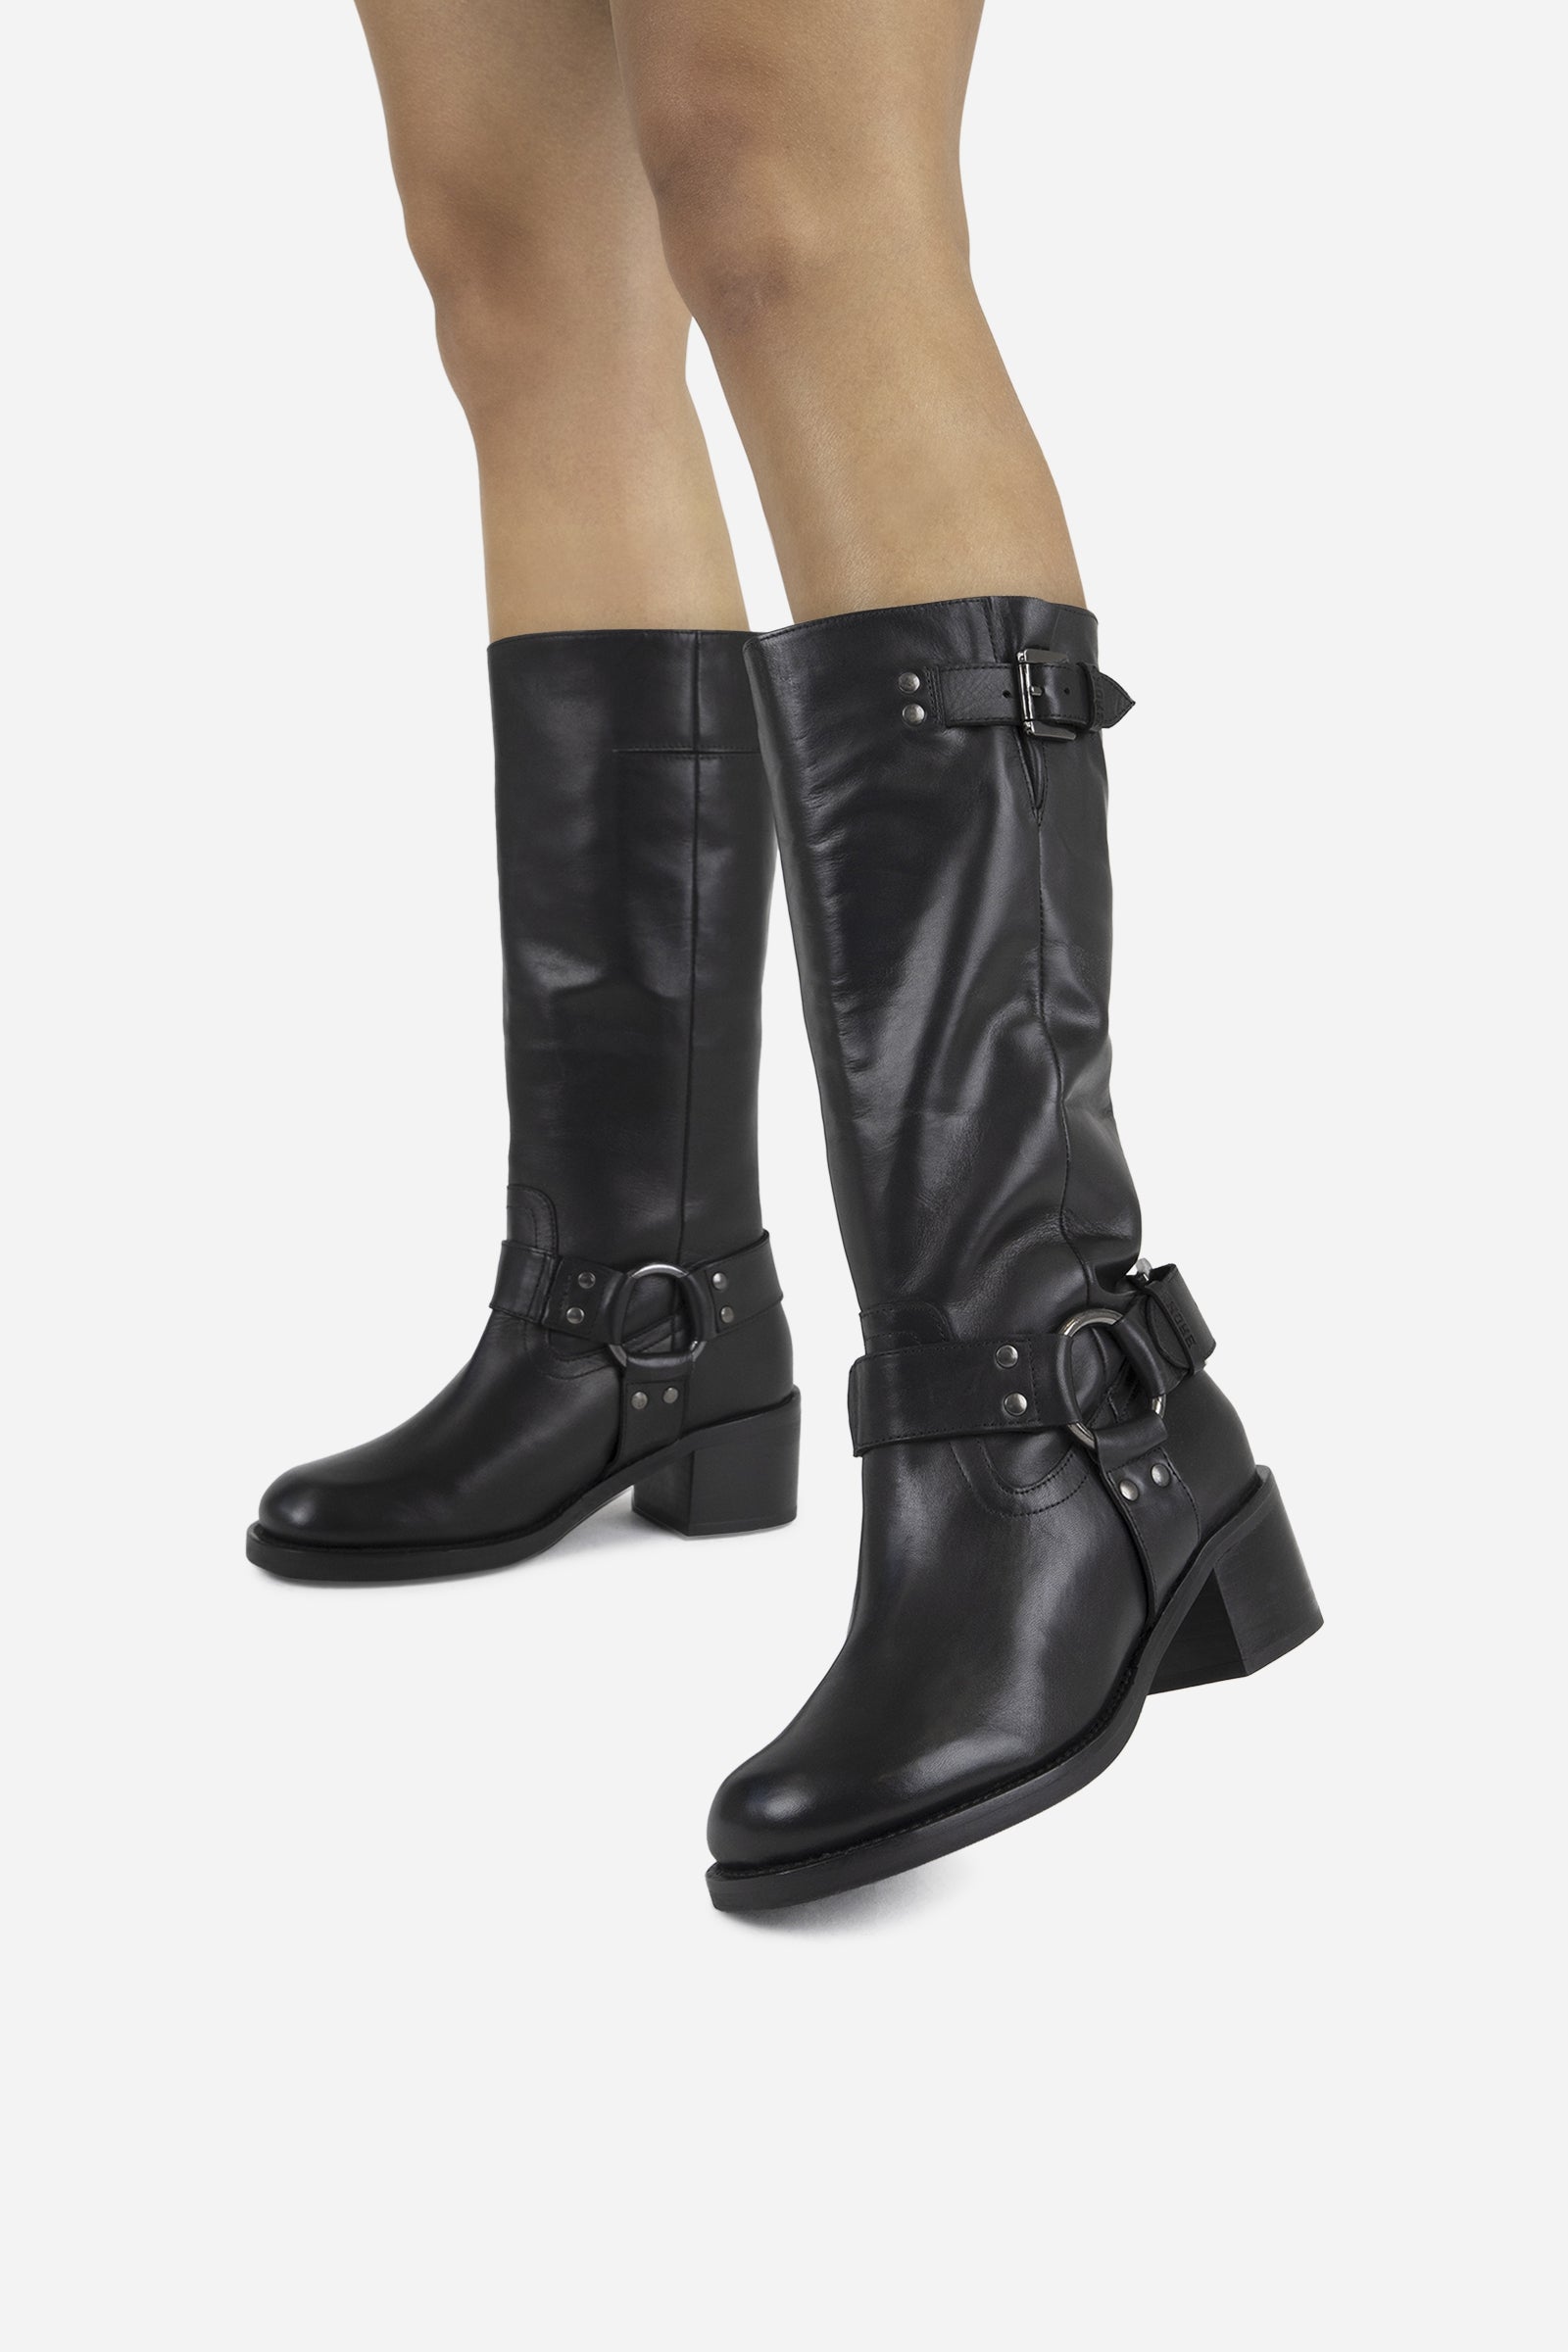 High Boots| BRONX Shoes